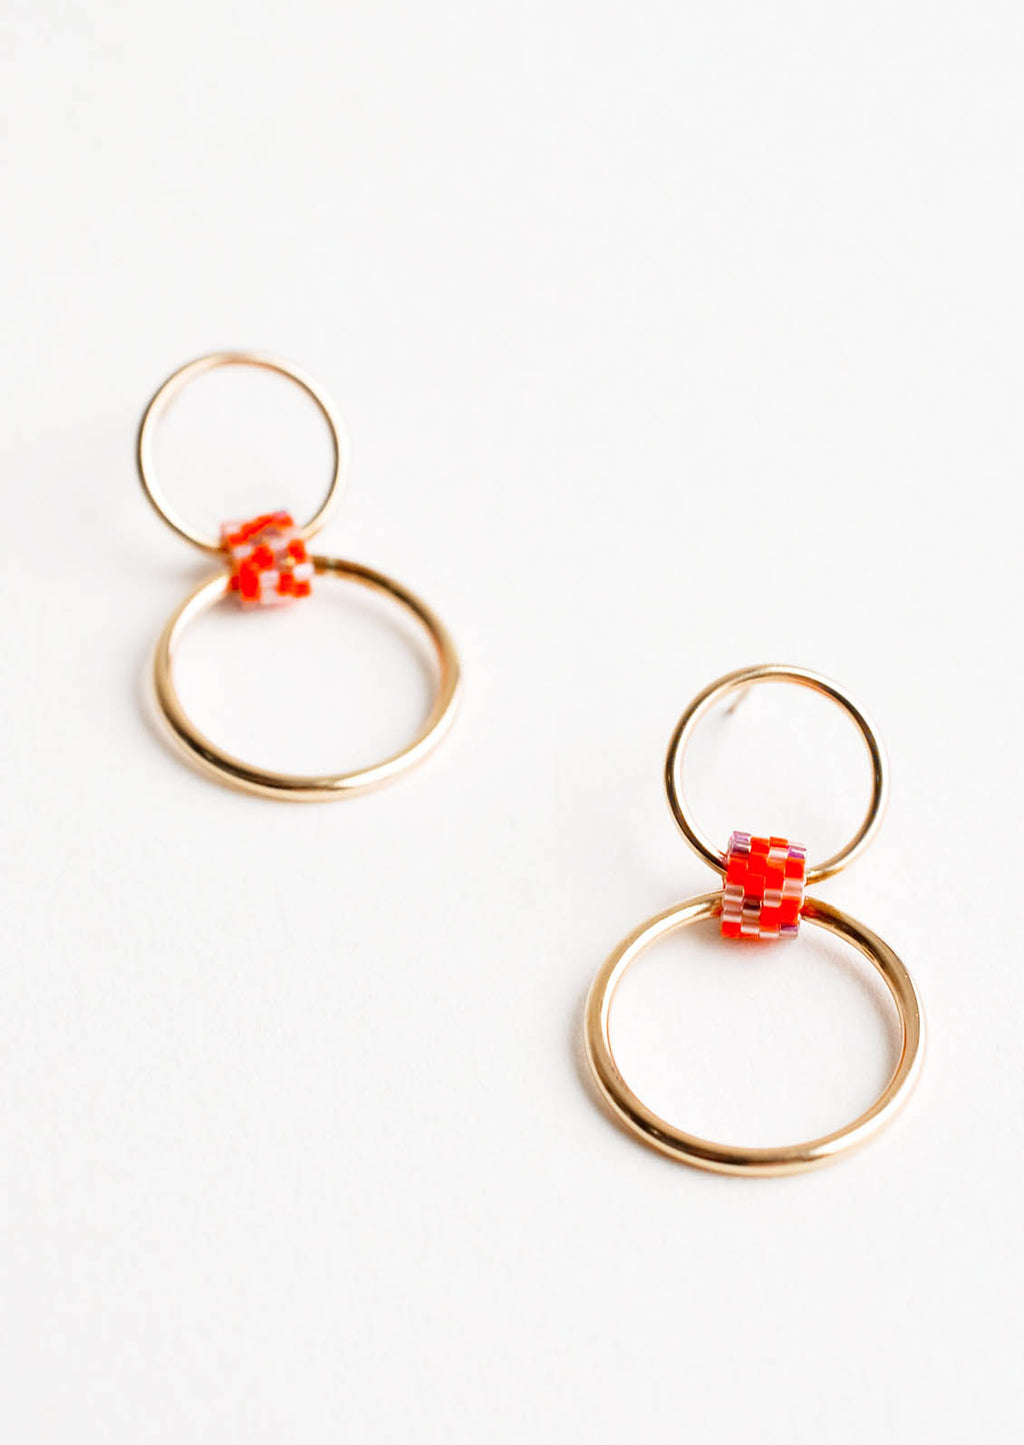 Orange Multi: Post back earrings of one small gold hoop and one larger gold hoop connected by a loop of orange glass beads.